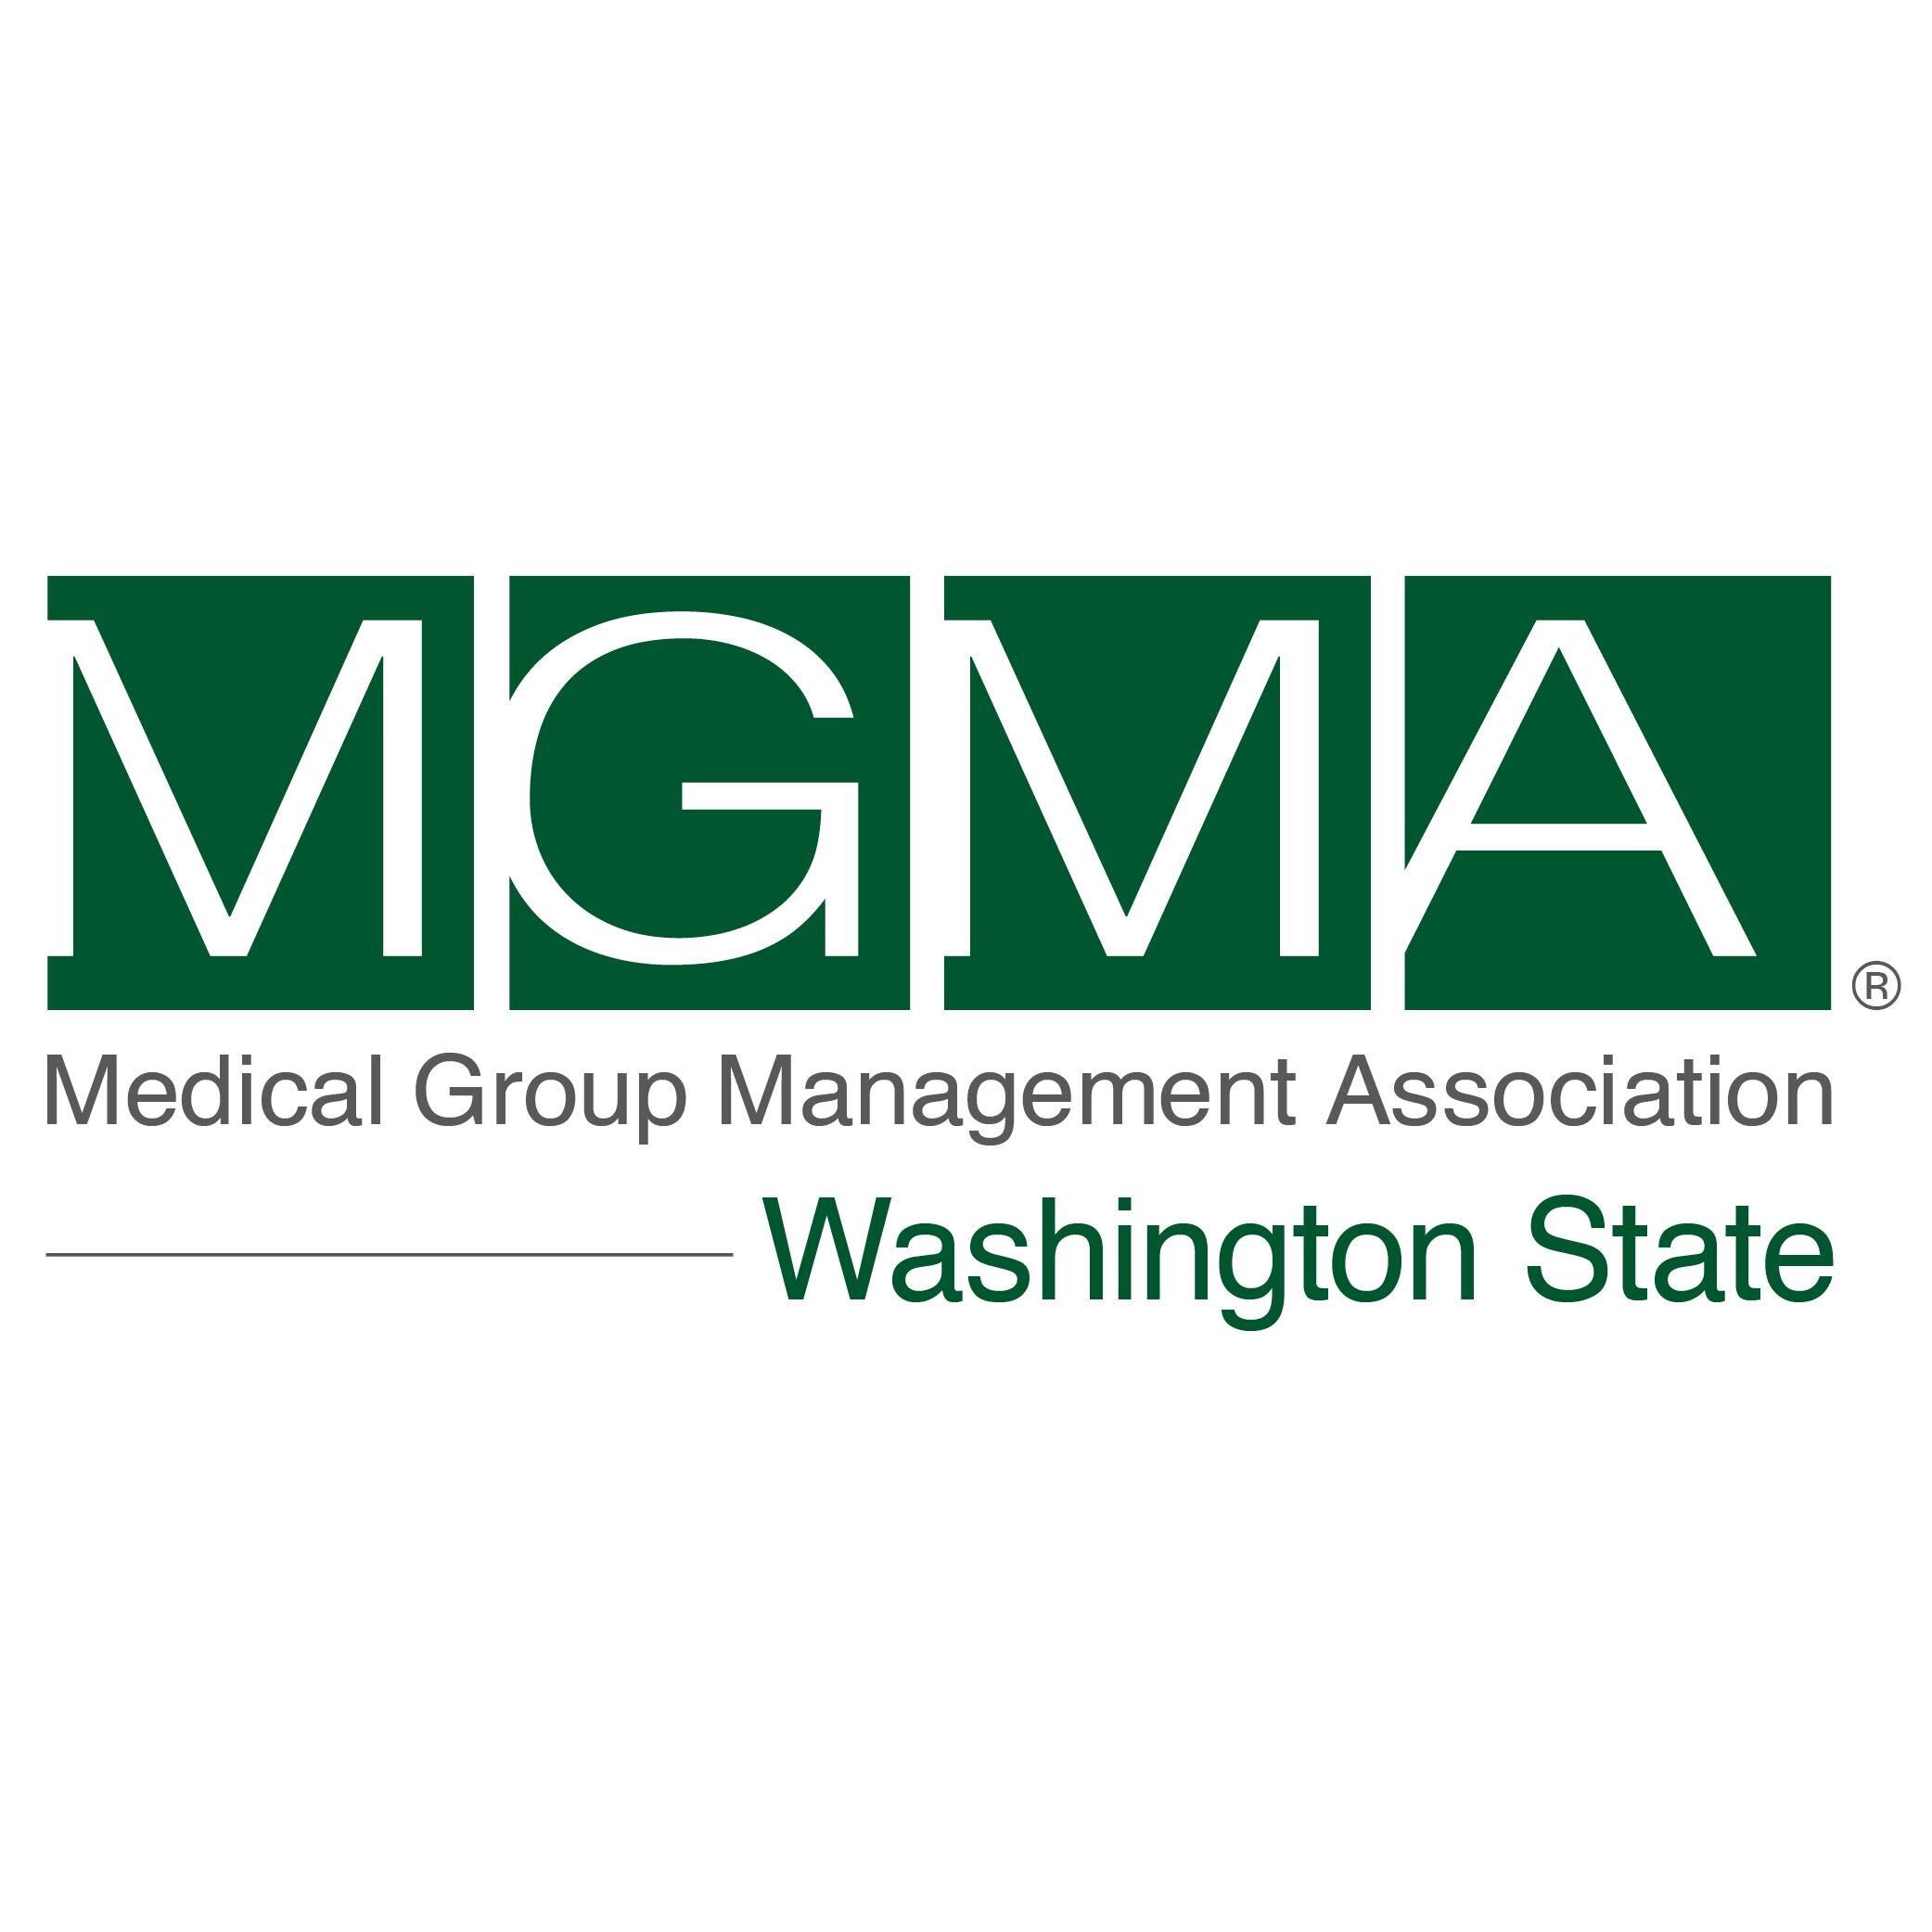 MGMA Washington State is Washington's premier association of medical practice managers & administrators. RTs are not endorsements.